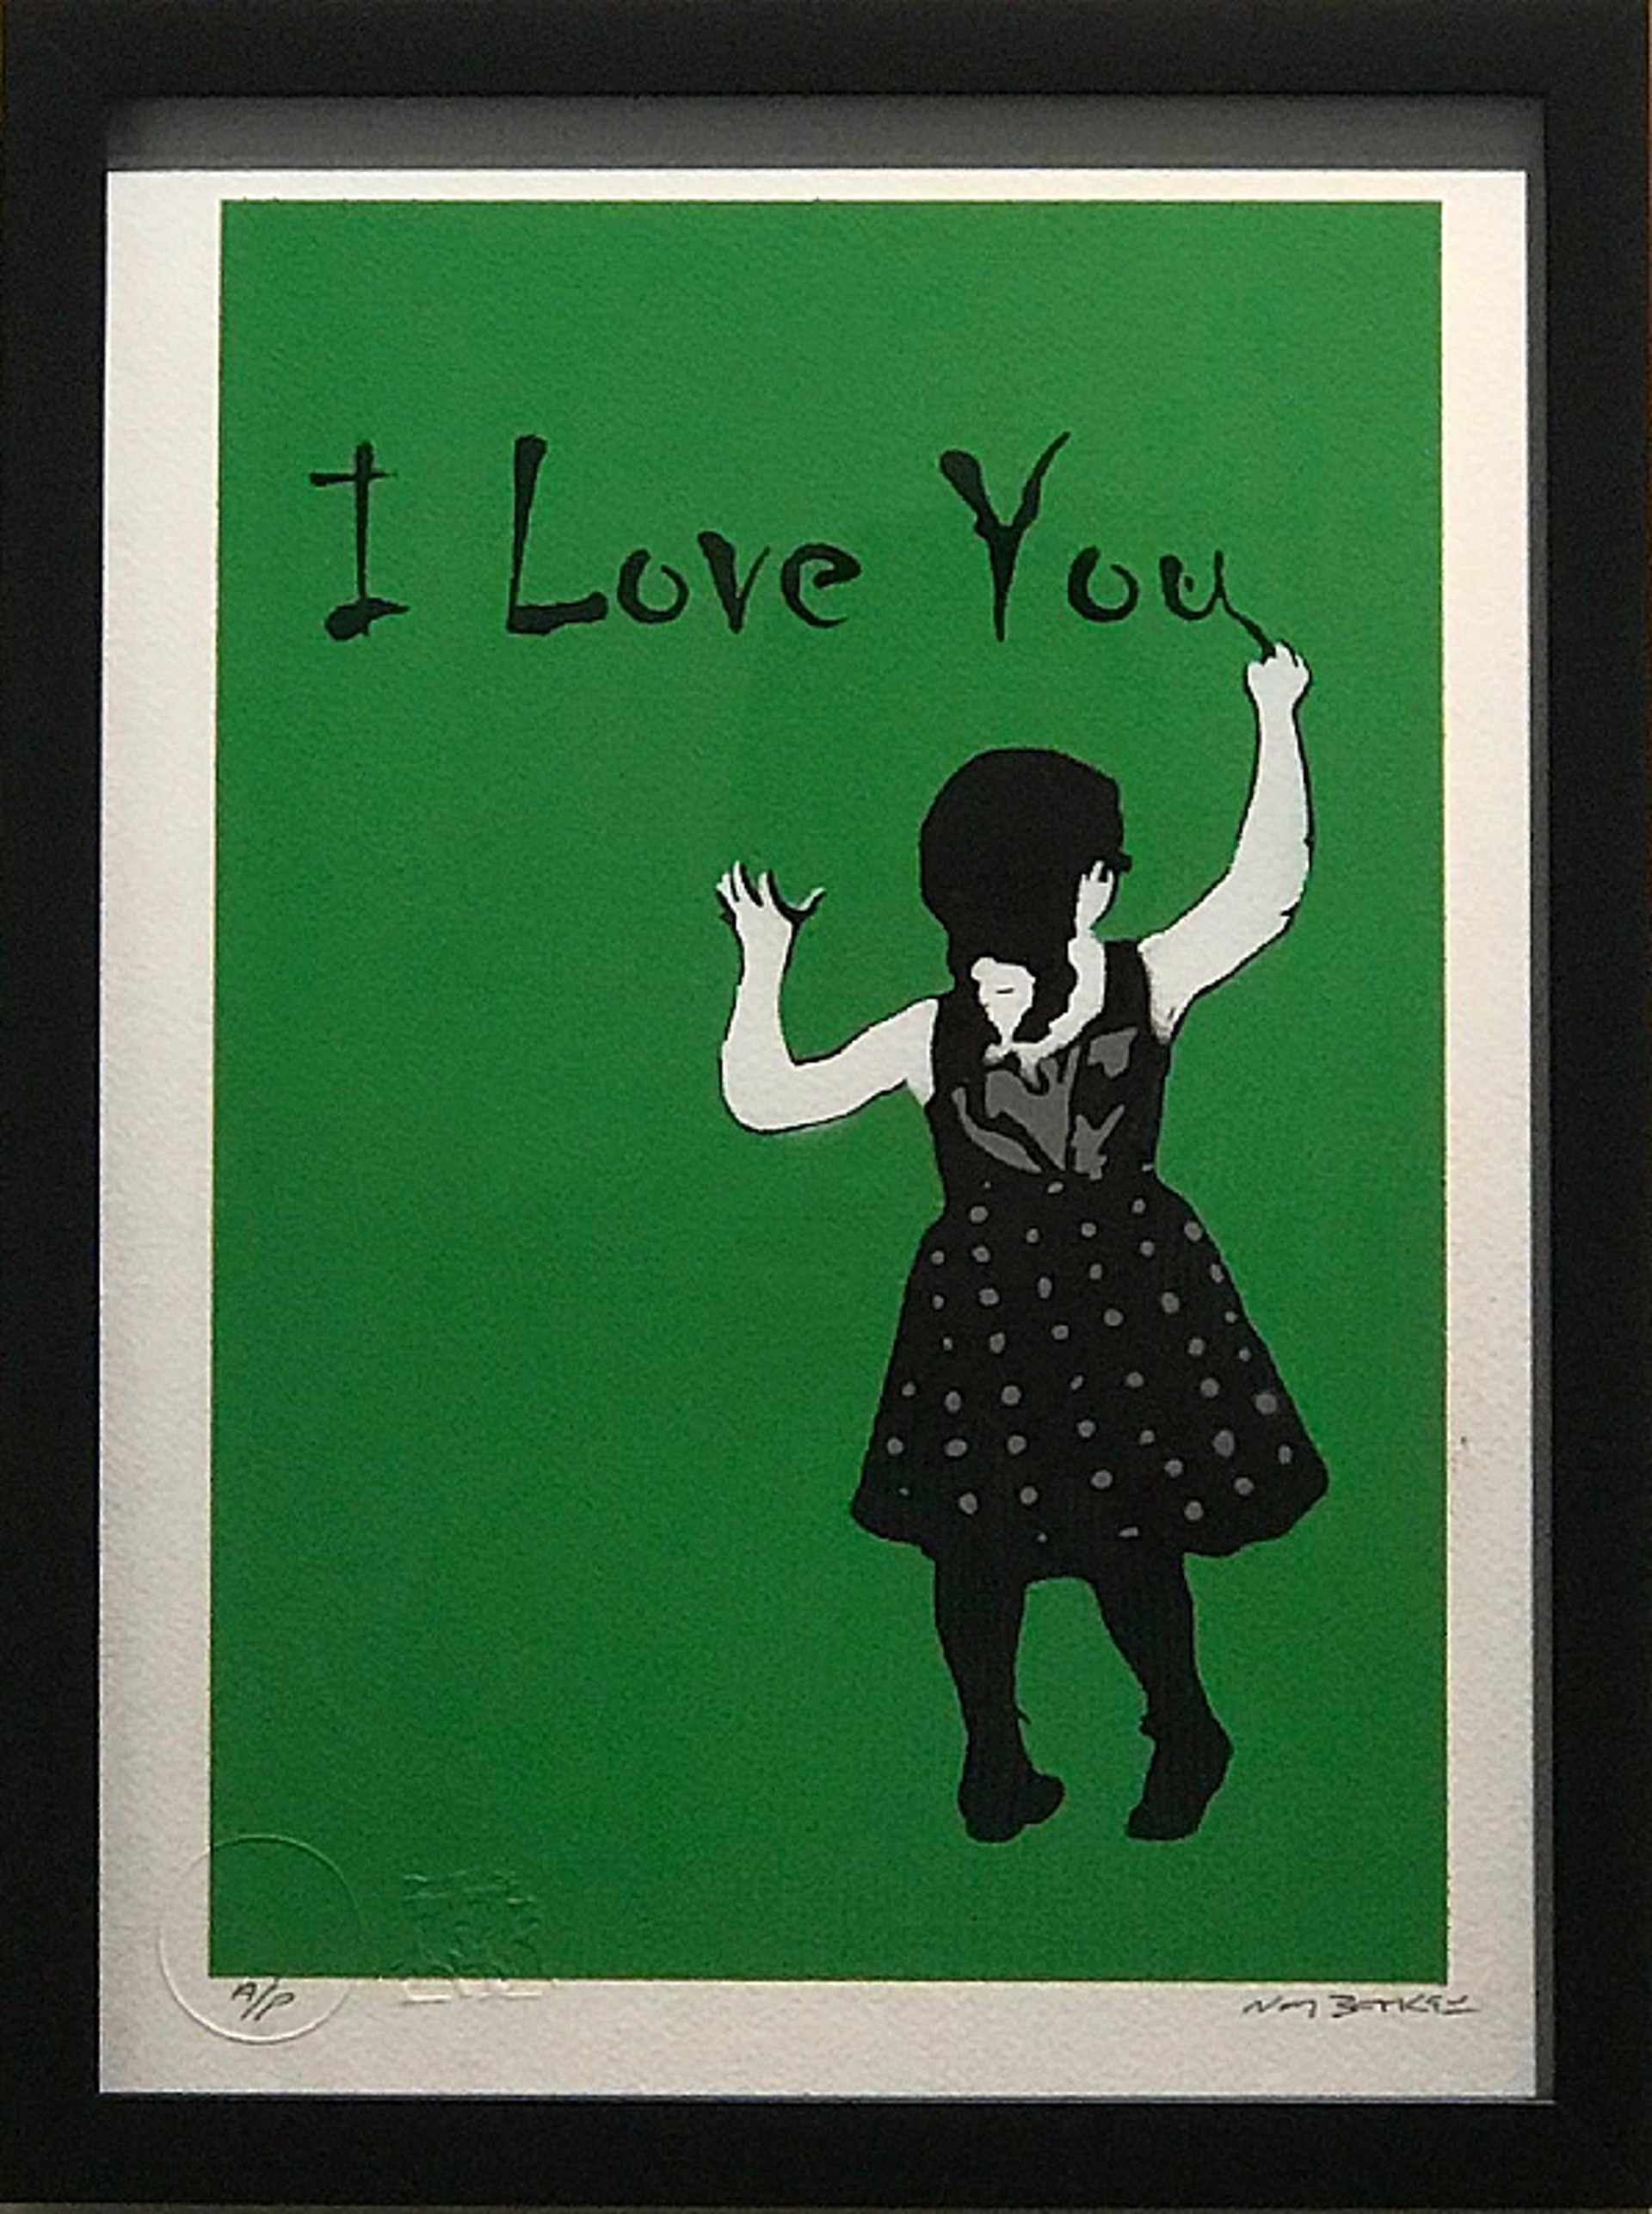 I Love You (Green) by Not Banksy